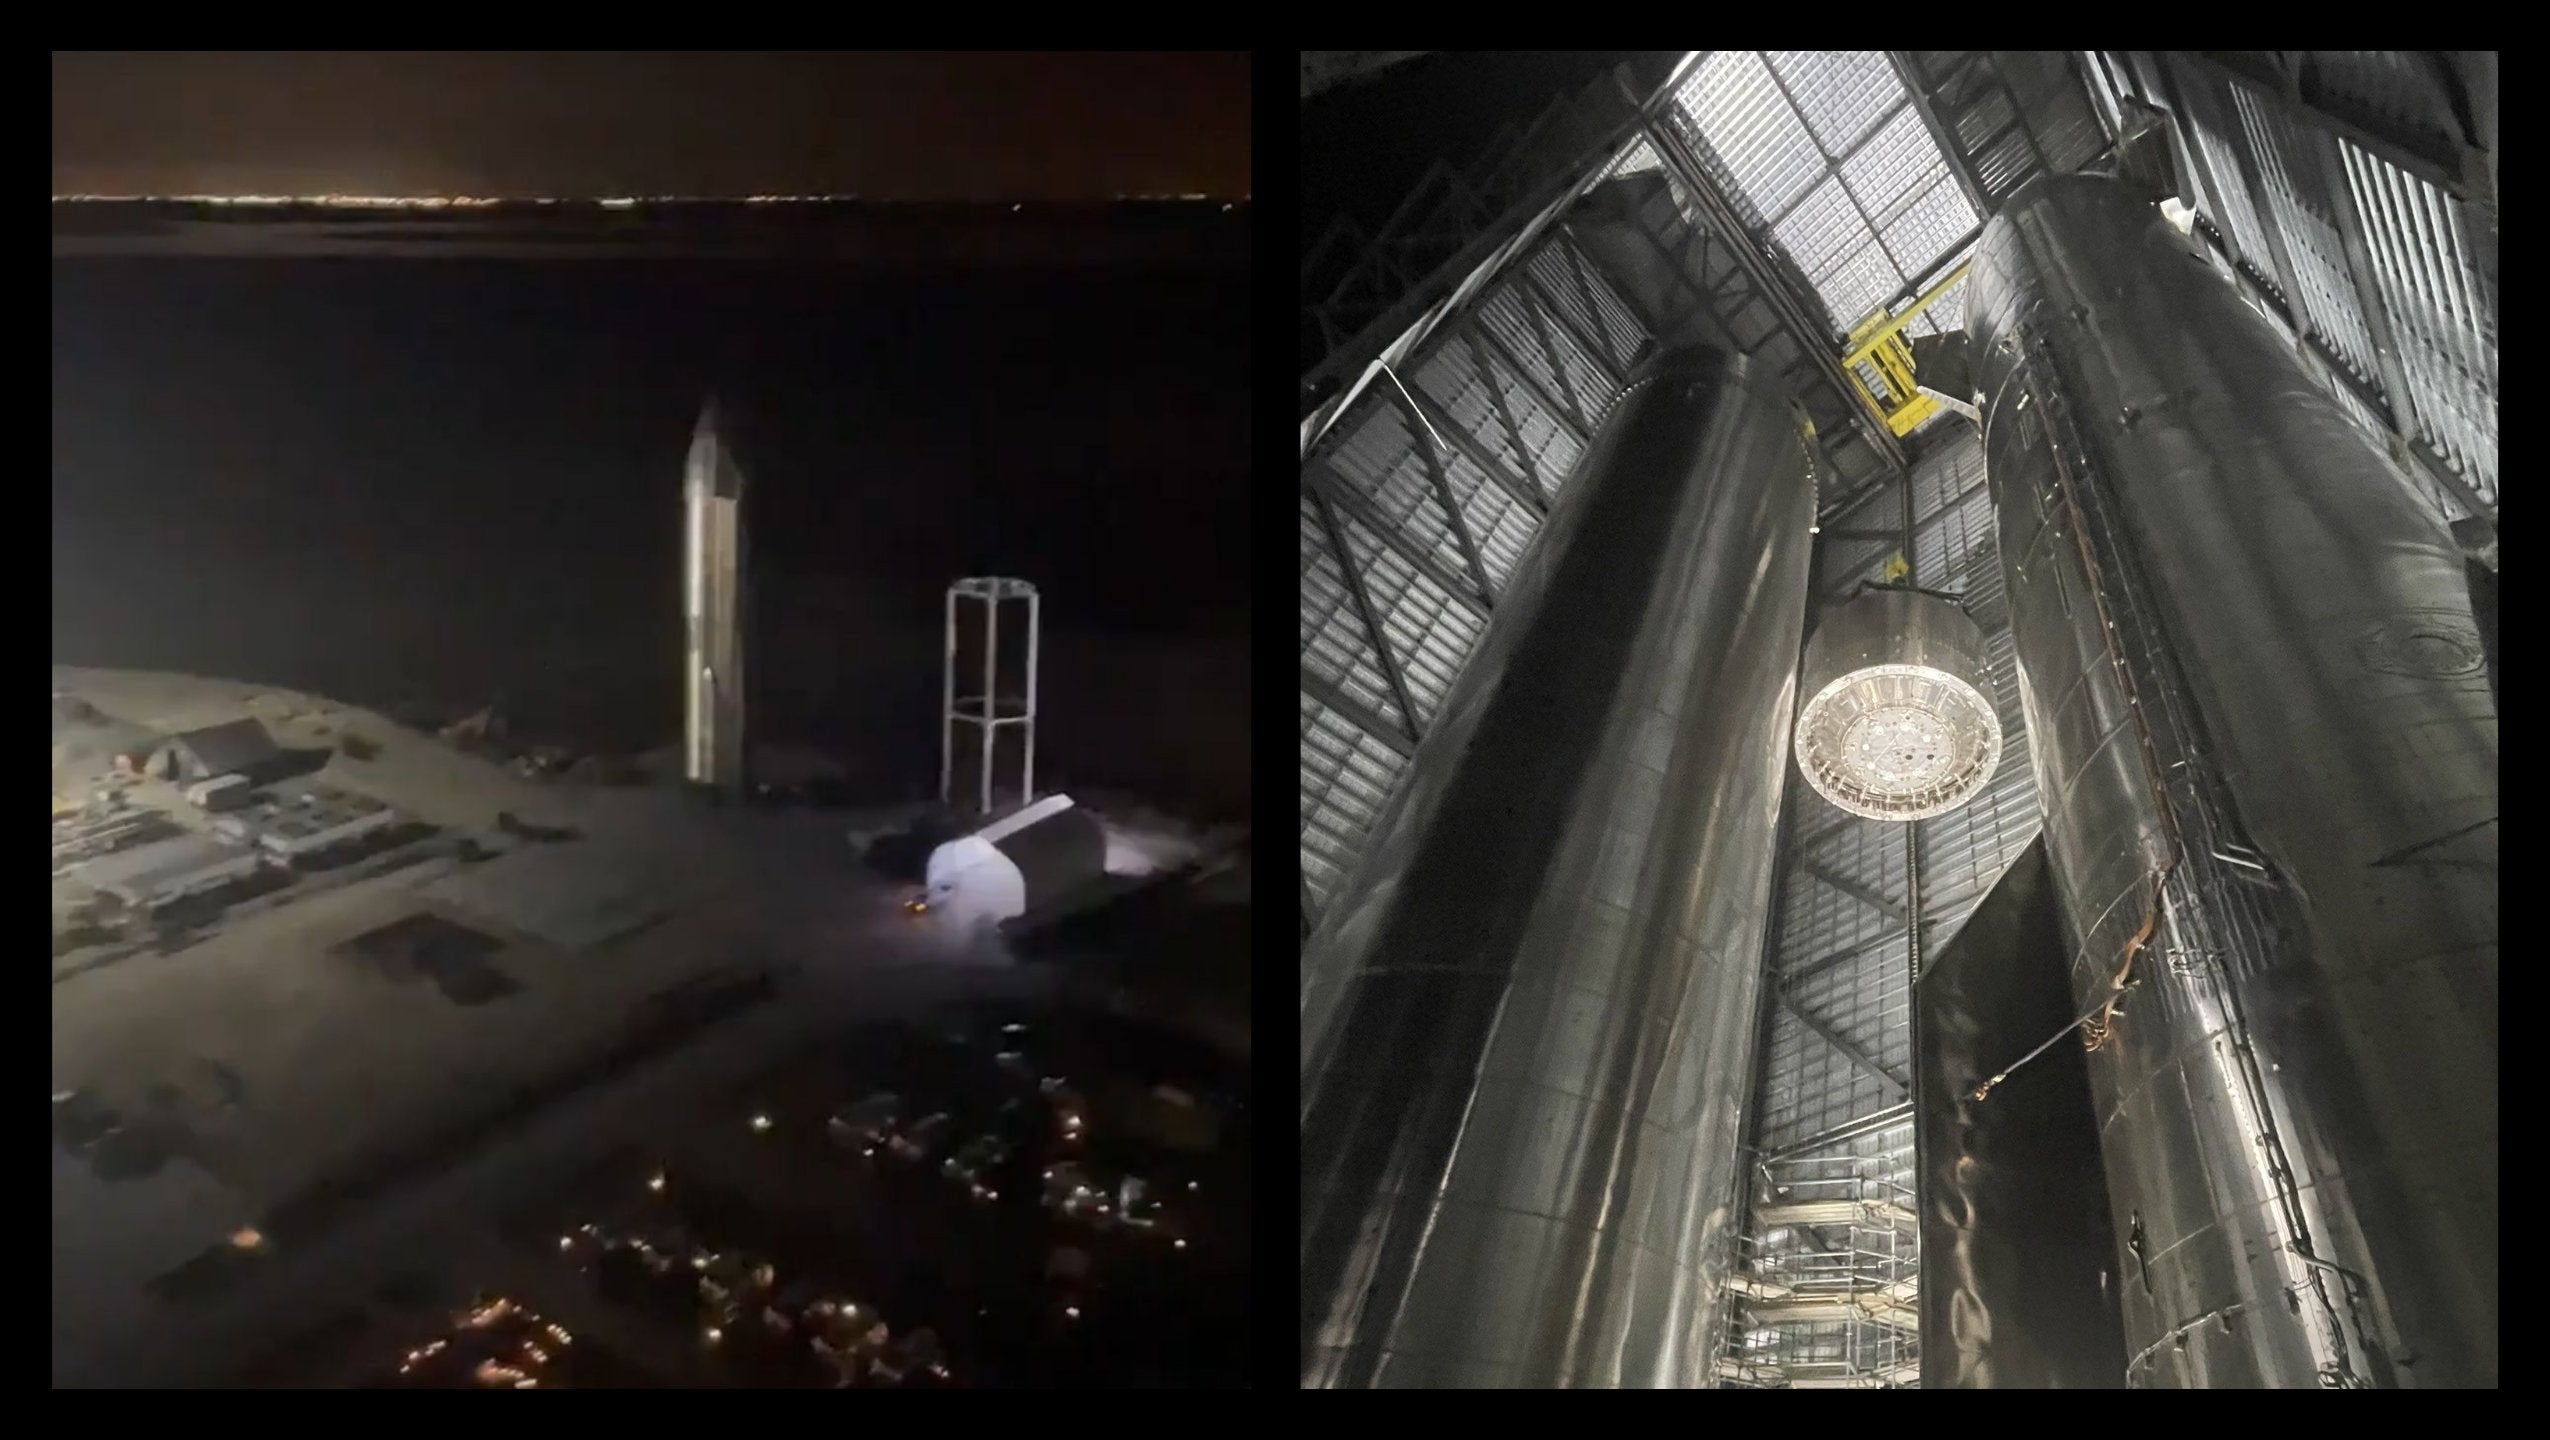 Elon Musk Shares Incredible View Of SpaceX’s Starship Factory From The Top Of A High Bay 'Bar'